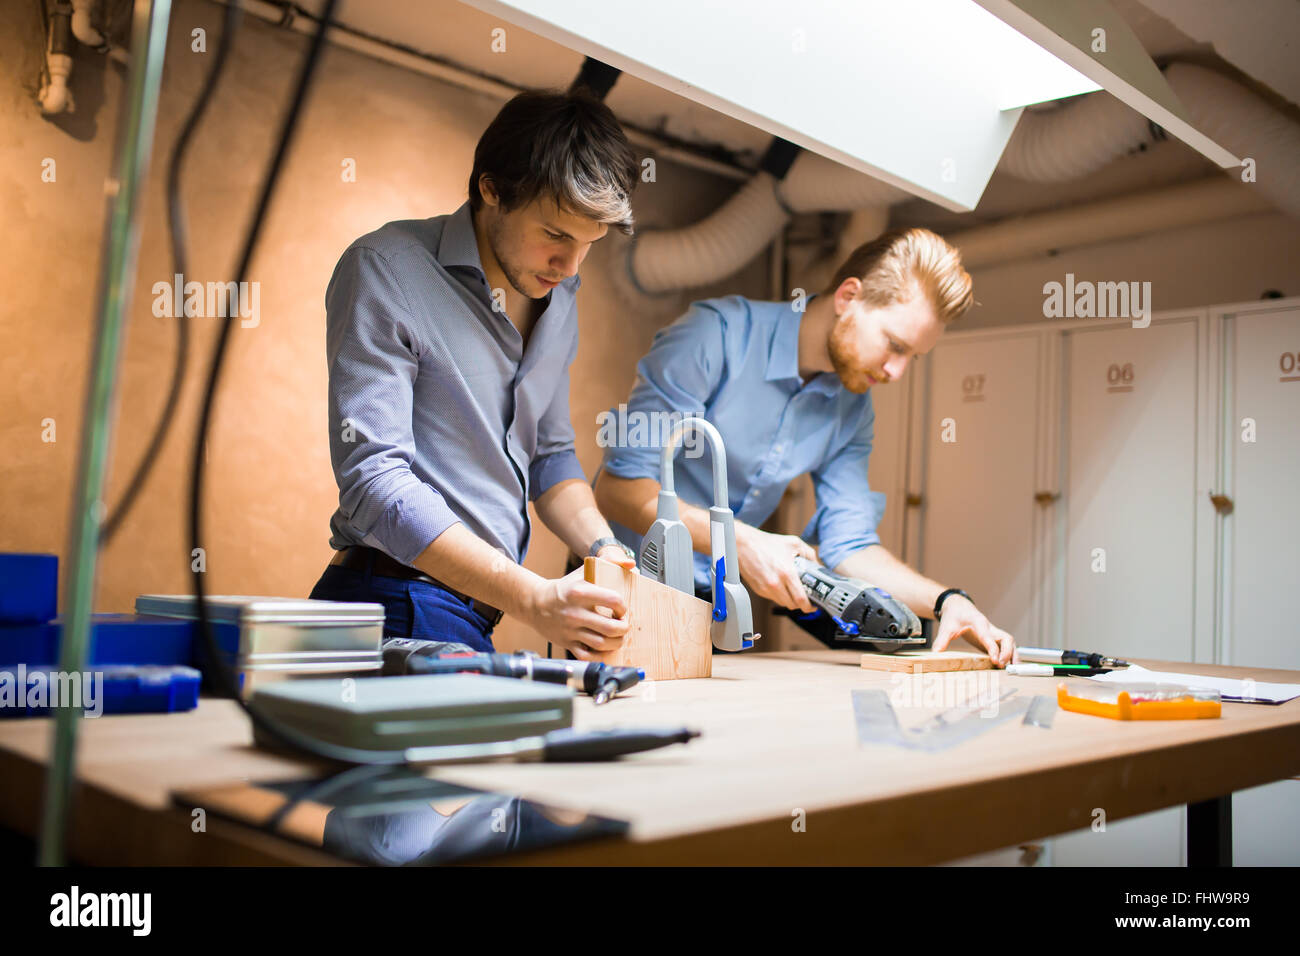 Two creative designers working in workshop with precision tools manufacturing a new product Stock Photo